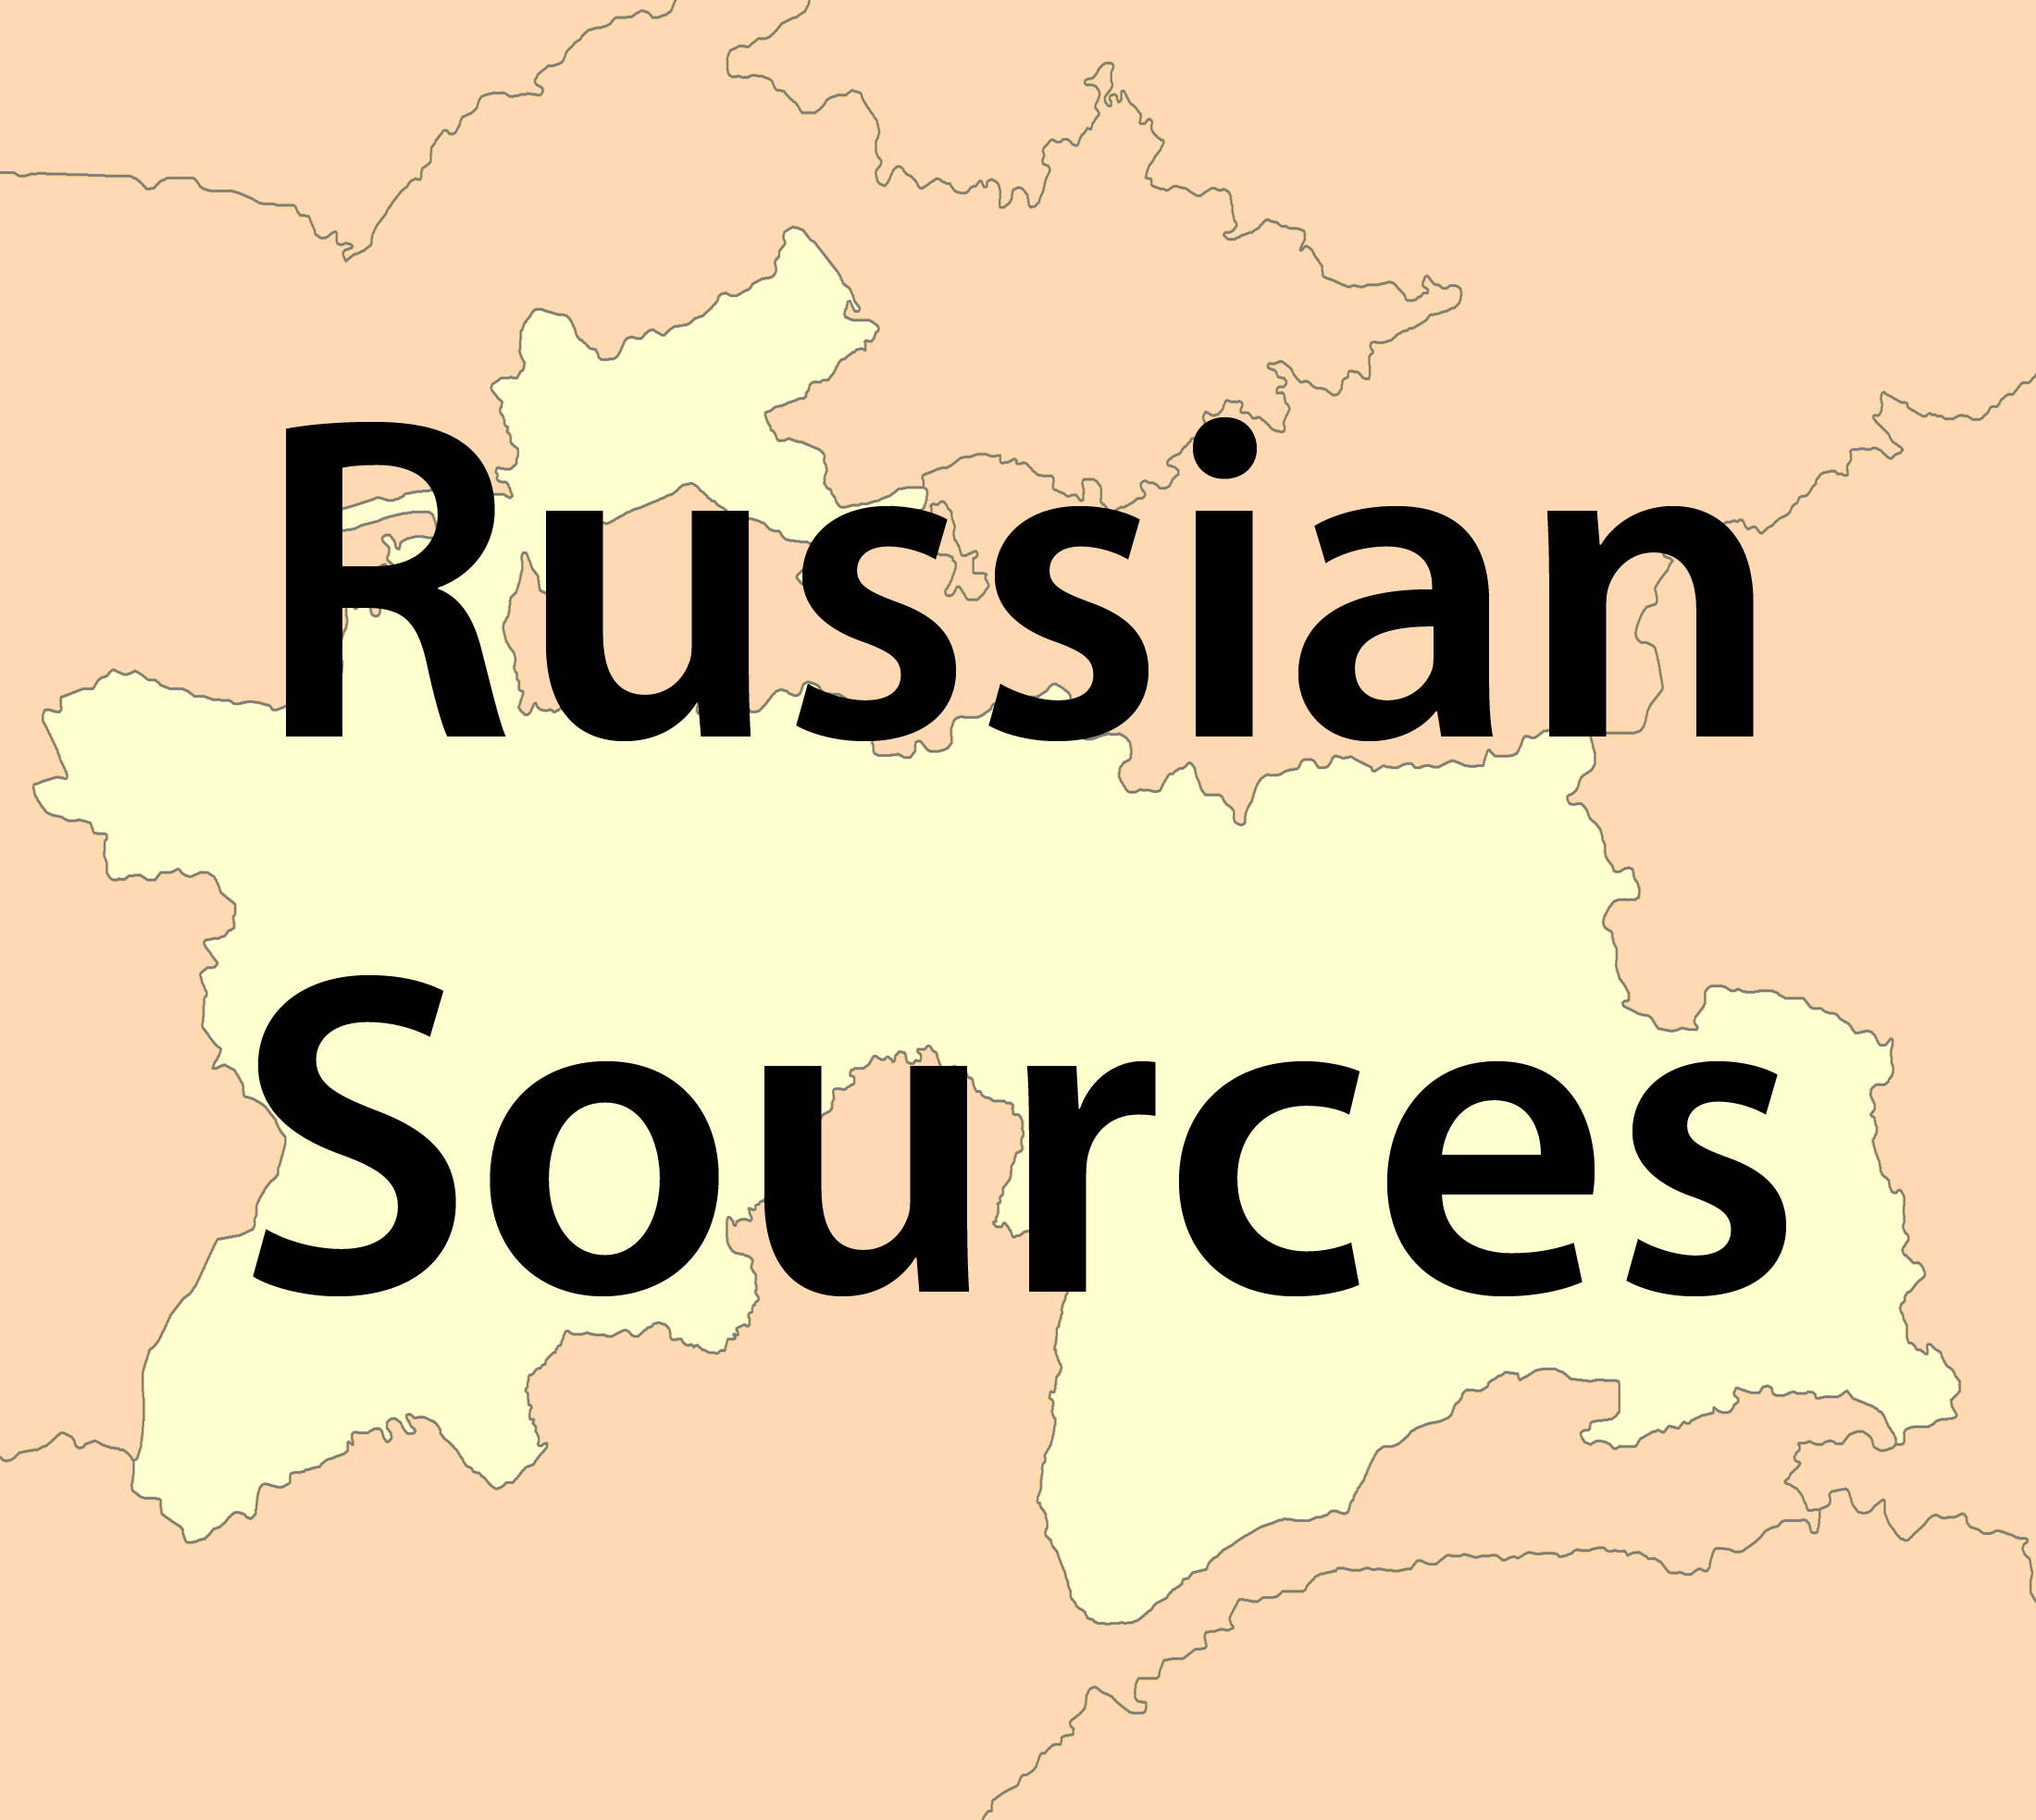 Russian sources